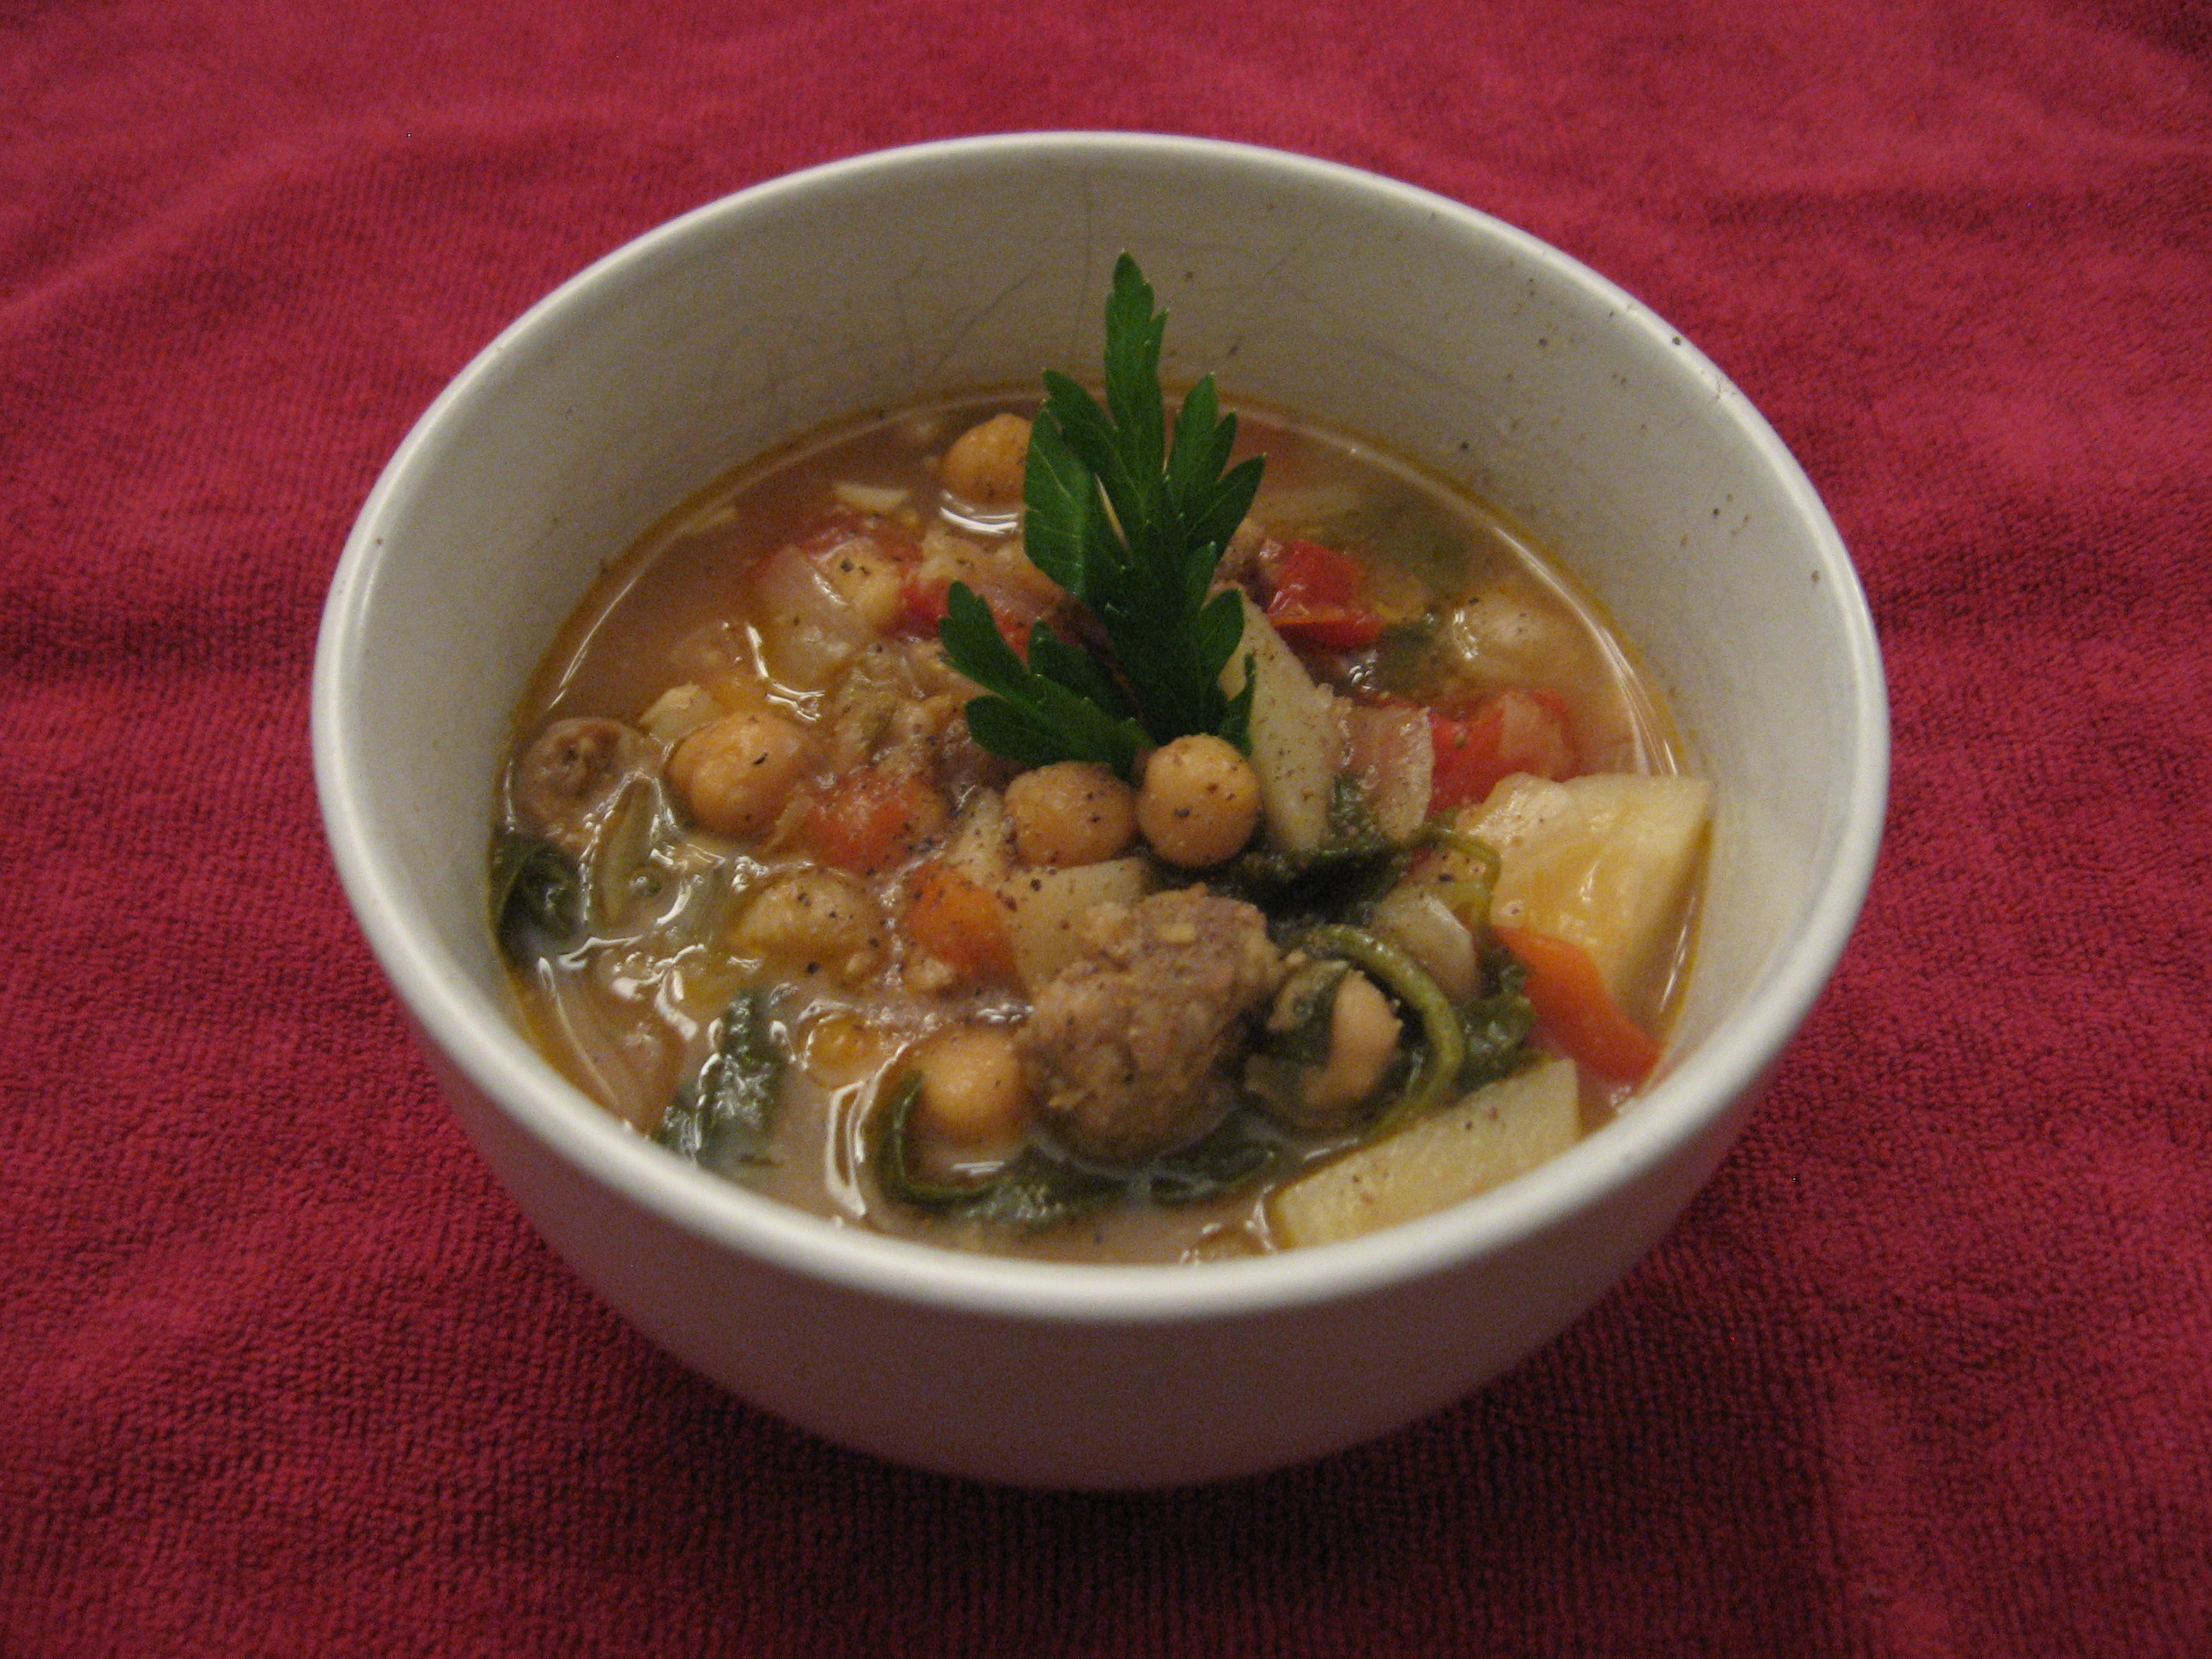 Chorizo and Kale Soup: Rachel Ray Meets The Honest Butcher (well their Chorizo anyway)